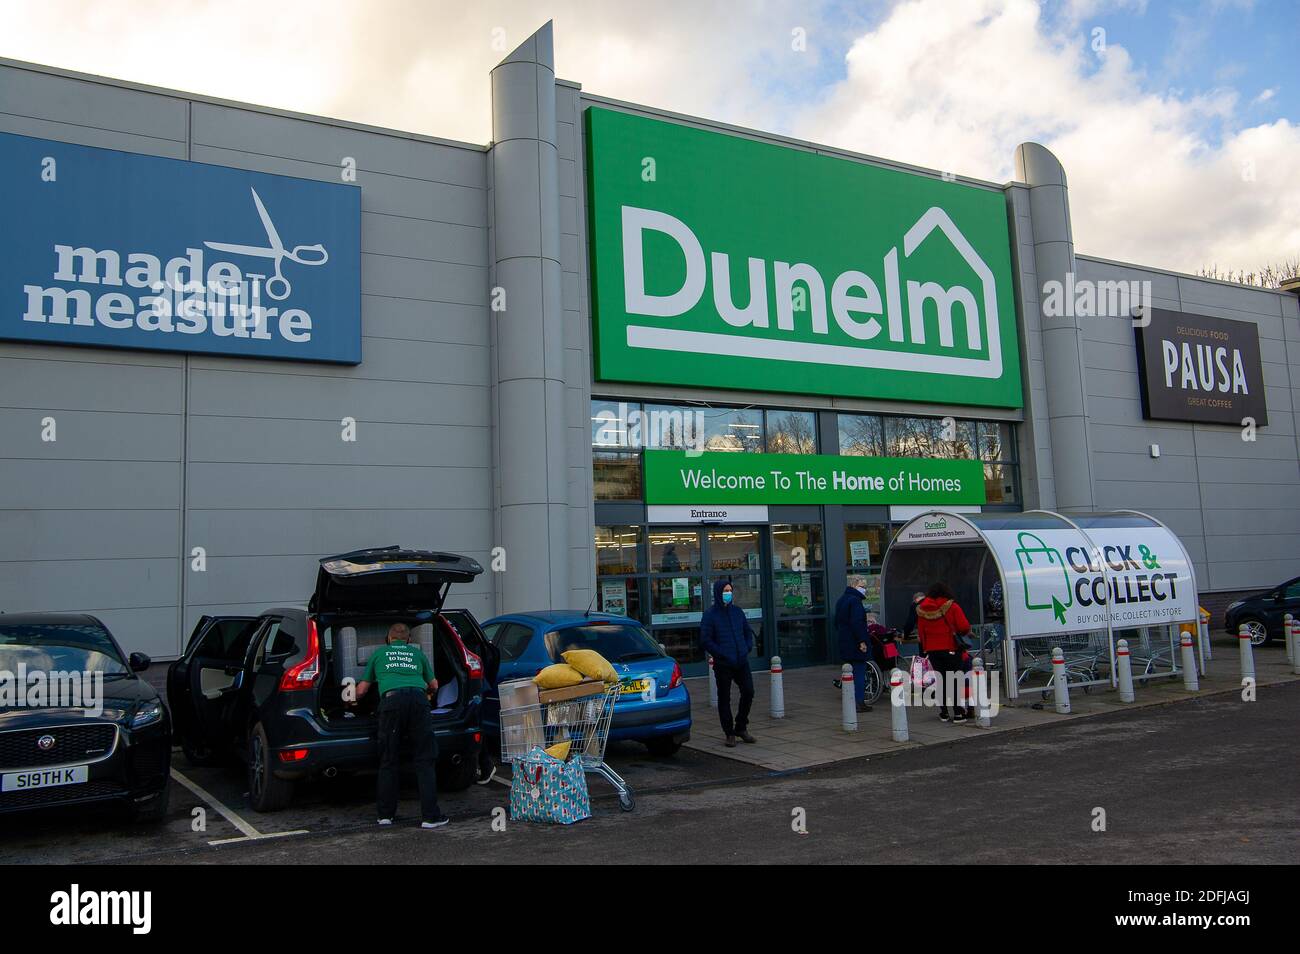 Slough, Berkshire, UK. 5th December, 2020. A busy morning at Dunelm in Slough. Following the end of the lockdown in England last week, Slough has been placed in Covid-19 Tier 3 meaning the highest possible restrictions that ban households from mixing indoors as well as in pubs and restaurants. Slough has the 14th highest Covid-19 infection rate in England. Despite that non essential shops have reopened in Slough and the Slough Retail Parks were very busy today with Christmas shoppers which is making some Slough residents feel nervous about the Covid-19 rate increasing even further. Credit: Mau Stock Photo